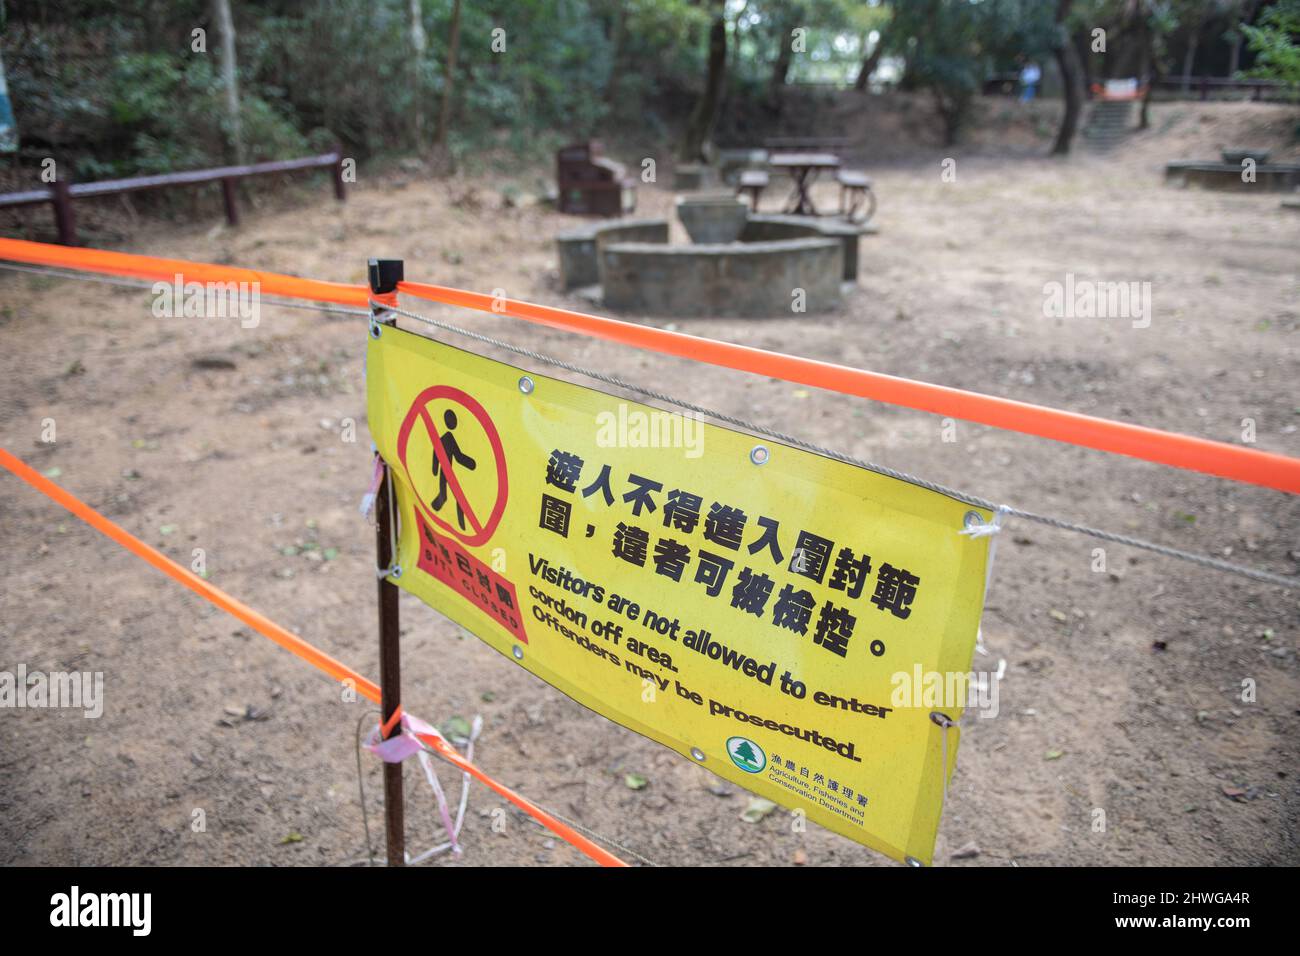 Zero Covid Hong Kong. Omicron.  2022.  Covid social restrictions in Hong Kong forcing public places and recreational facilities  to close due to Omicron. Picnic area closed. Stock Photo